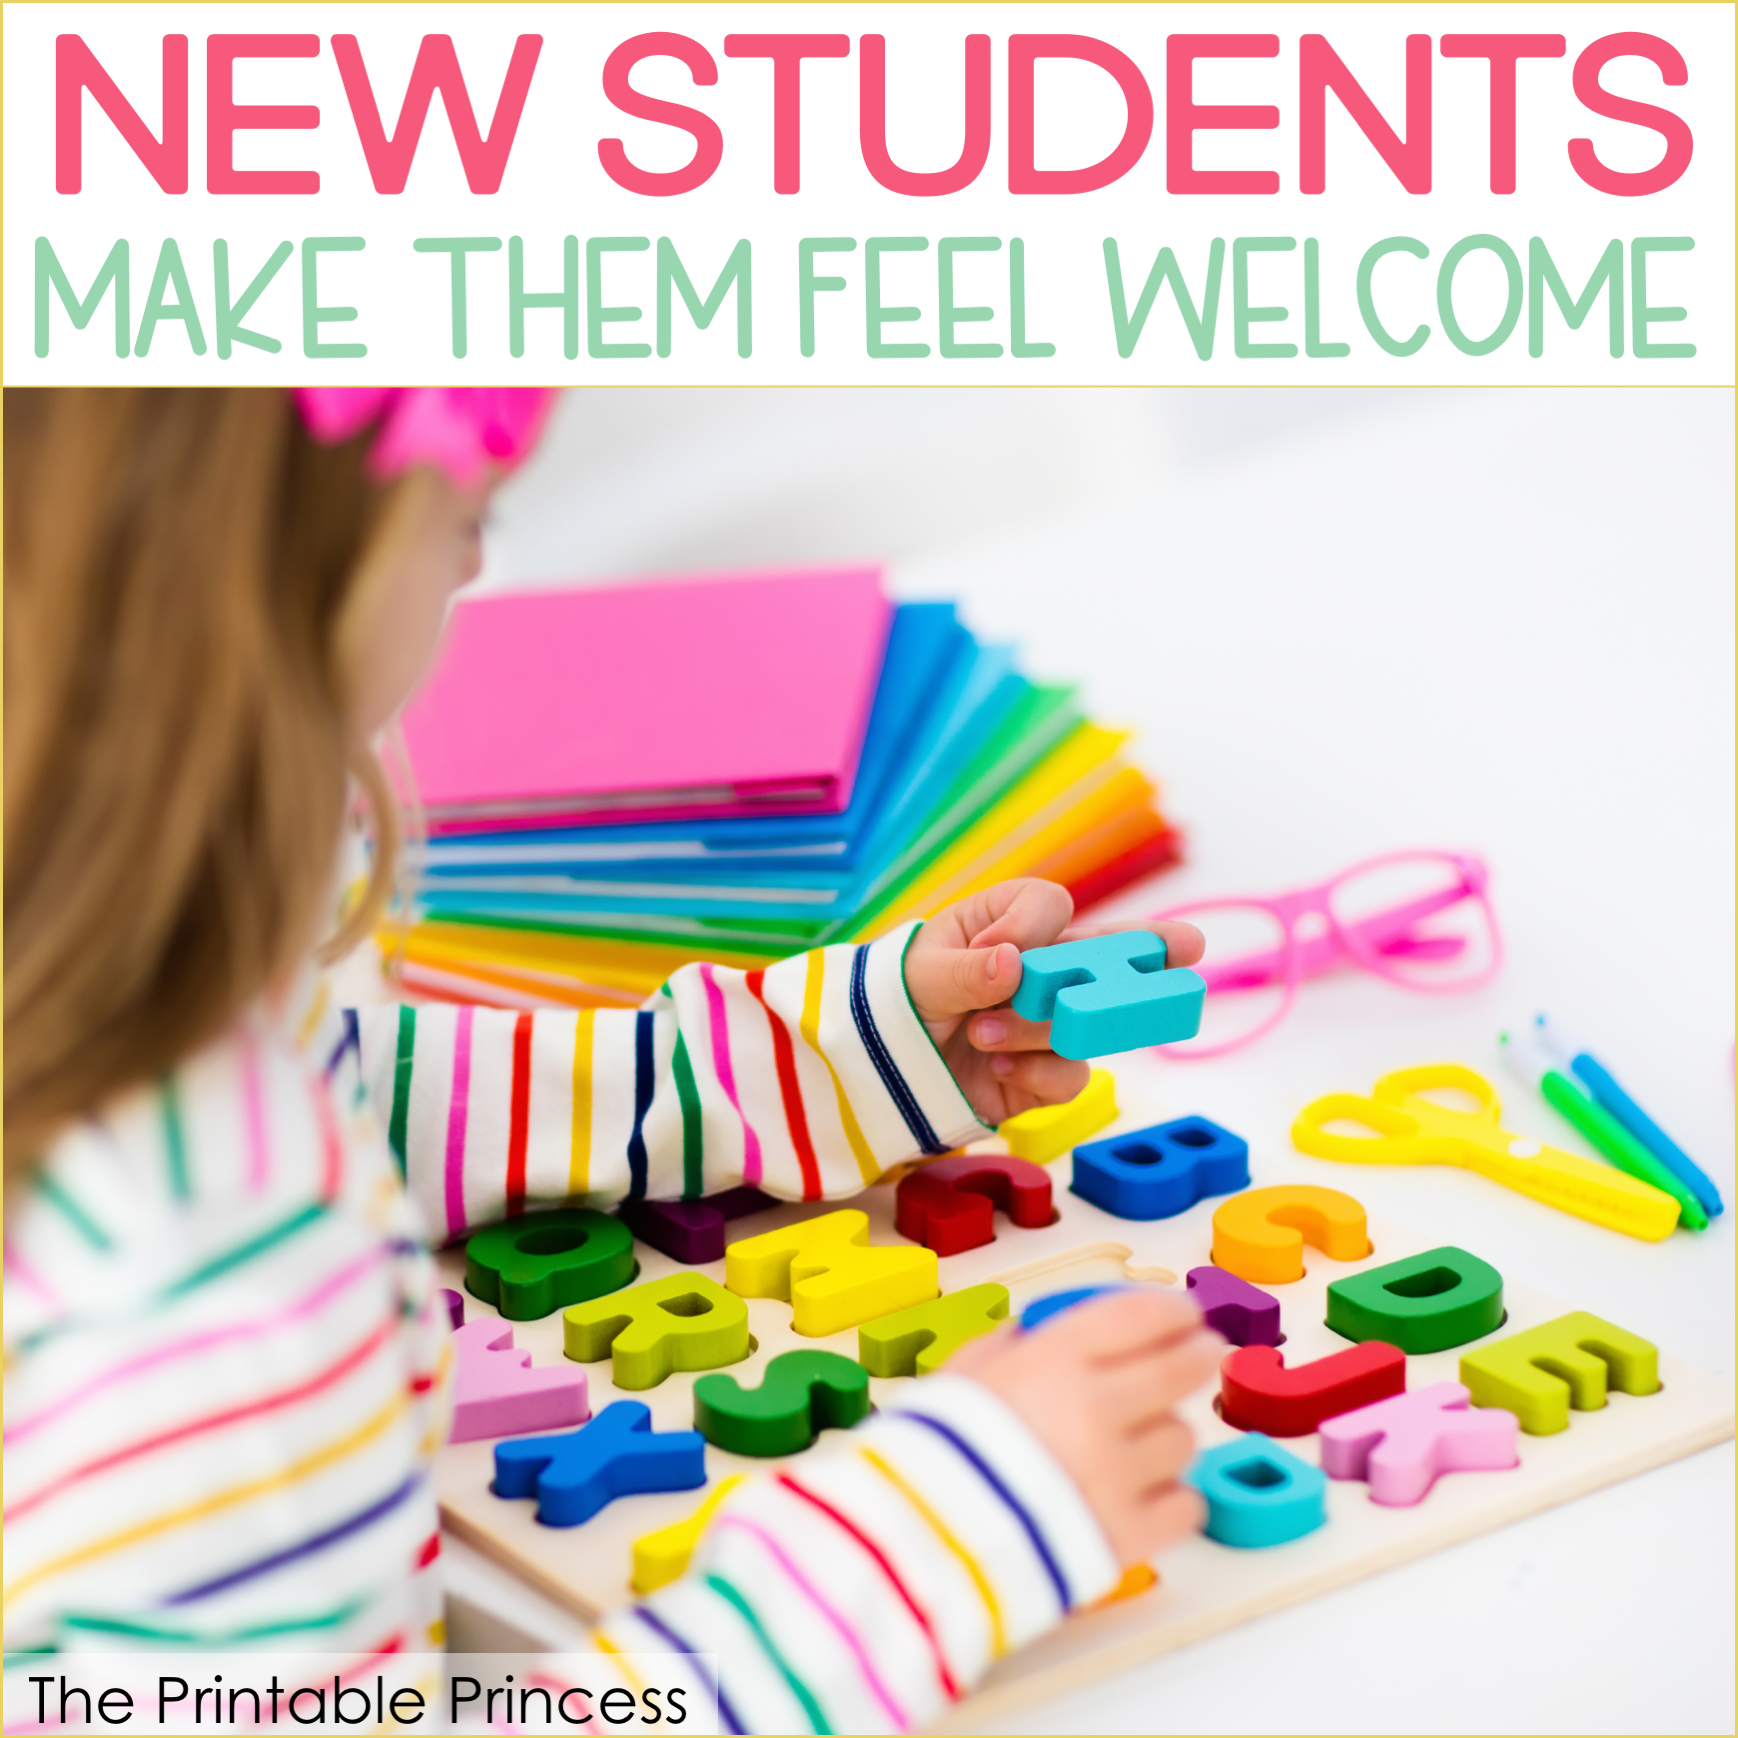 Making New Students Feel Welcome